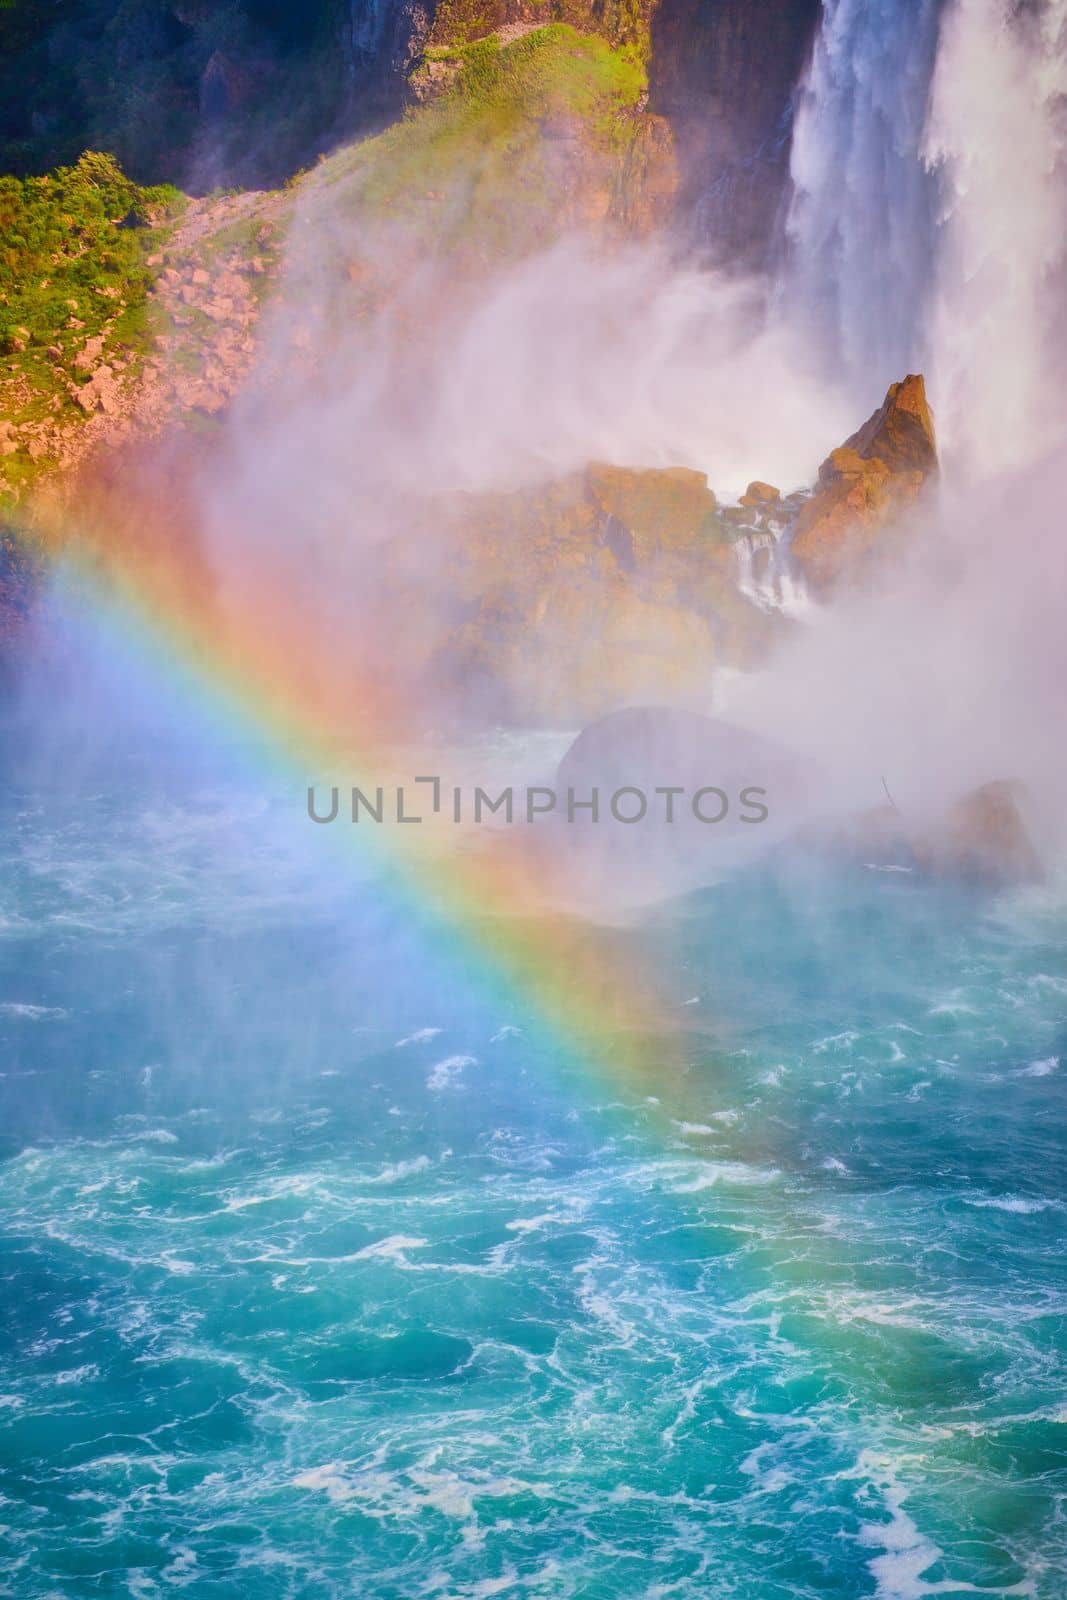 Rainbow crossing through Niagara River with American Falls behind in detail by njproductions